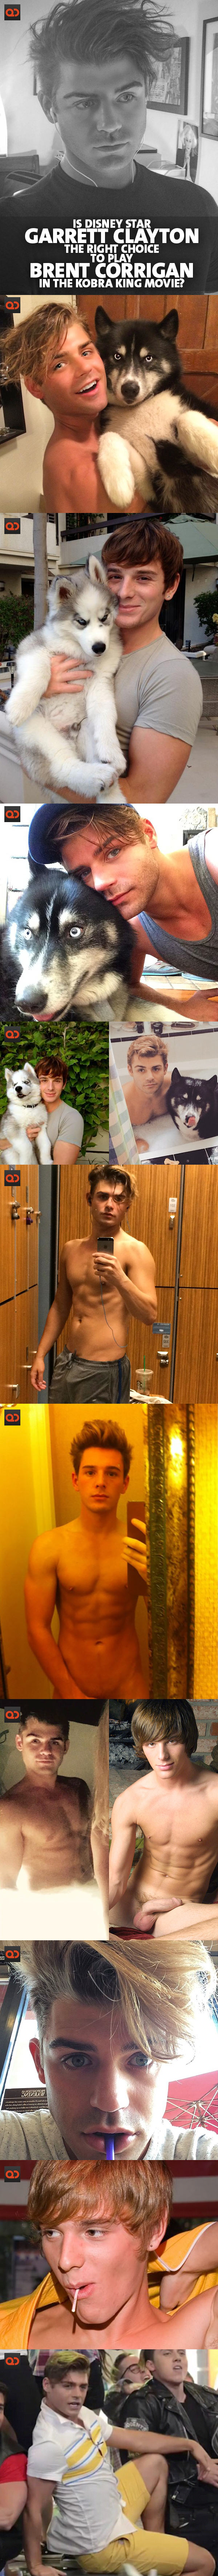 Is Disney Star Garrett Clayton The Right Choice To Play Brent Corrigan In A Movie?